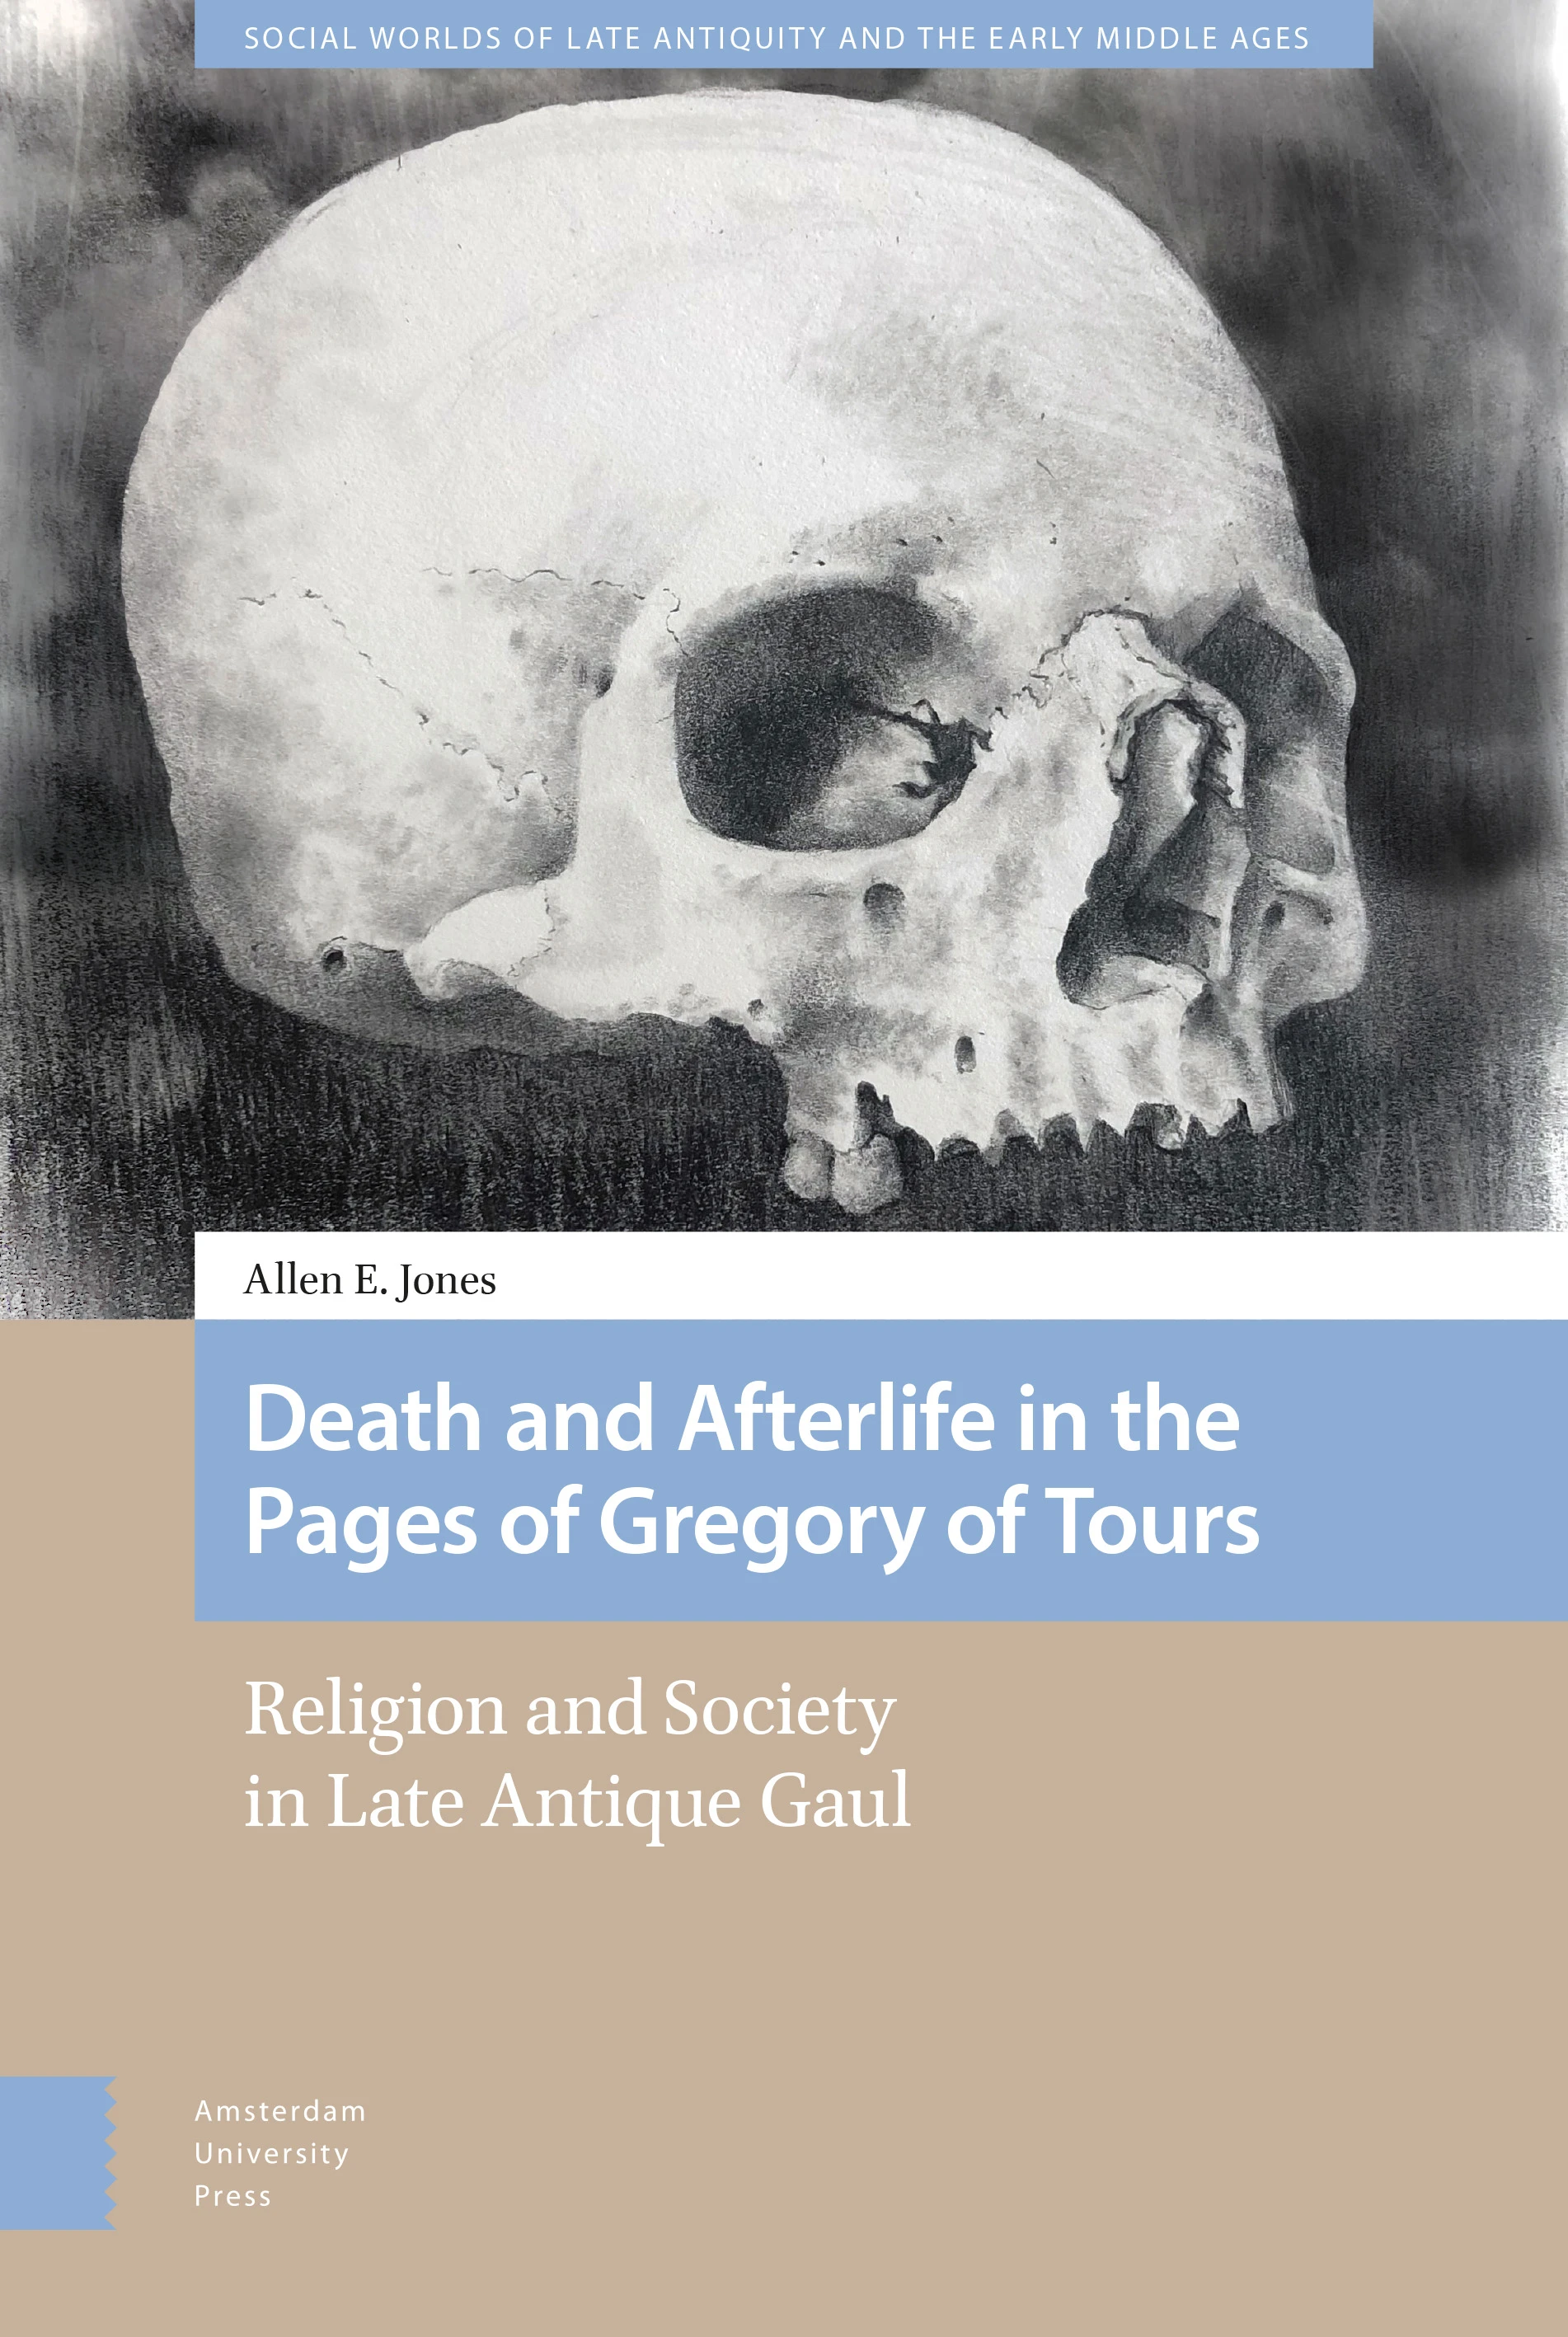 Cover of Jones' book, which features a drawing of a skull.